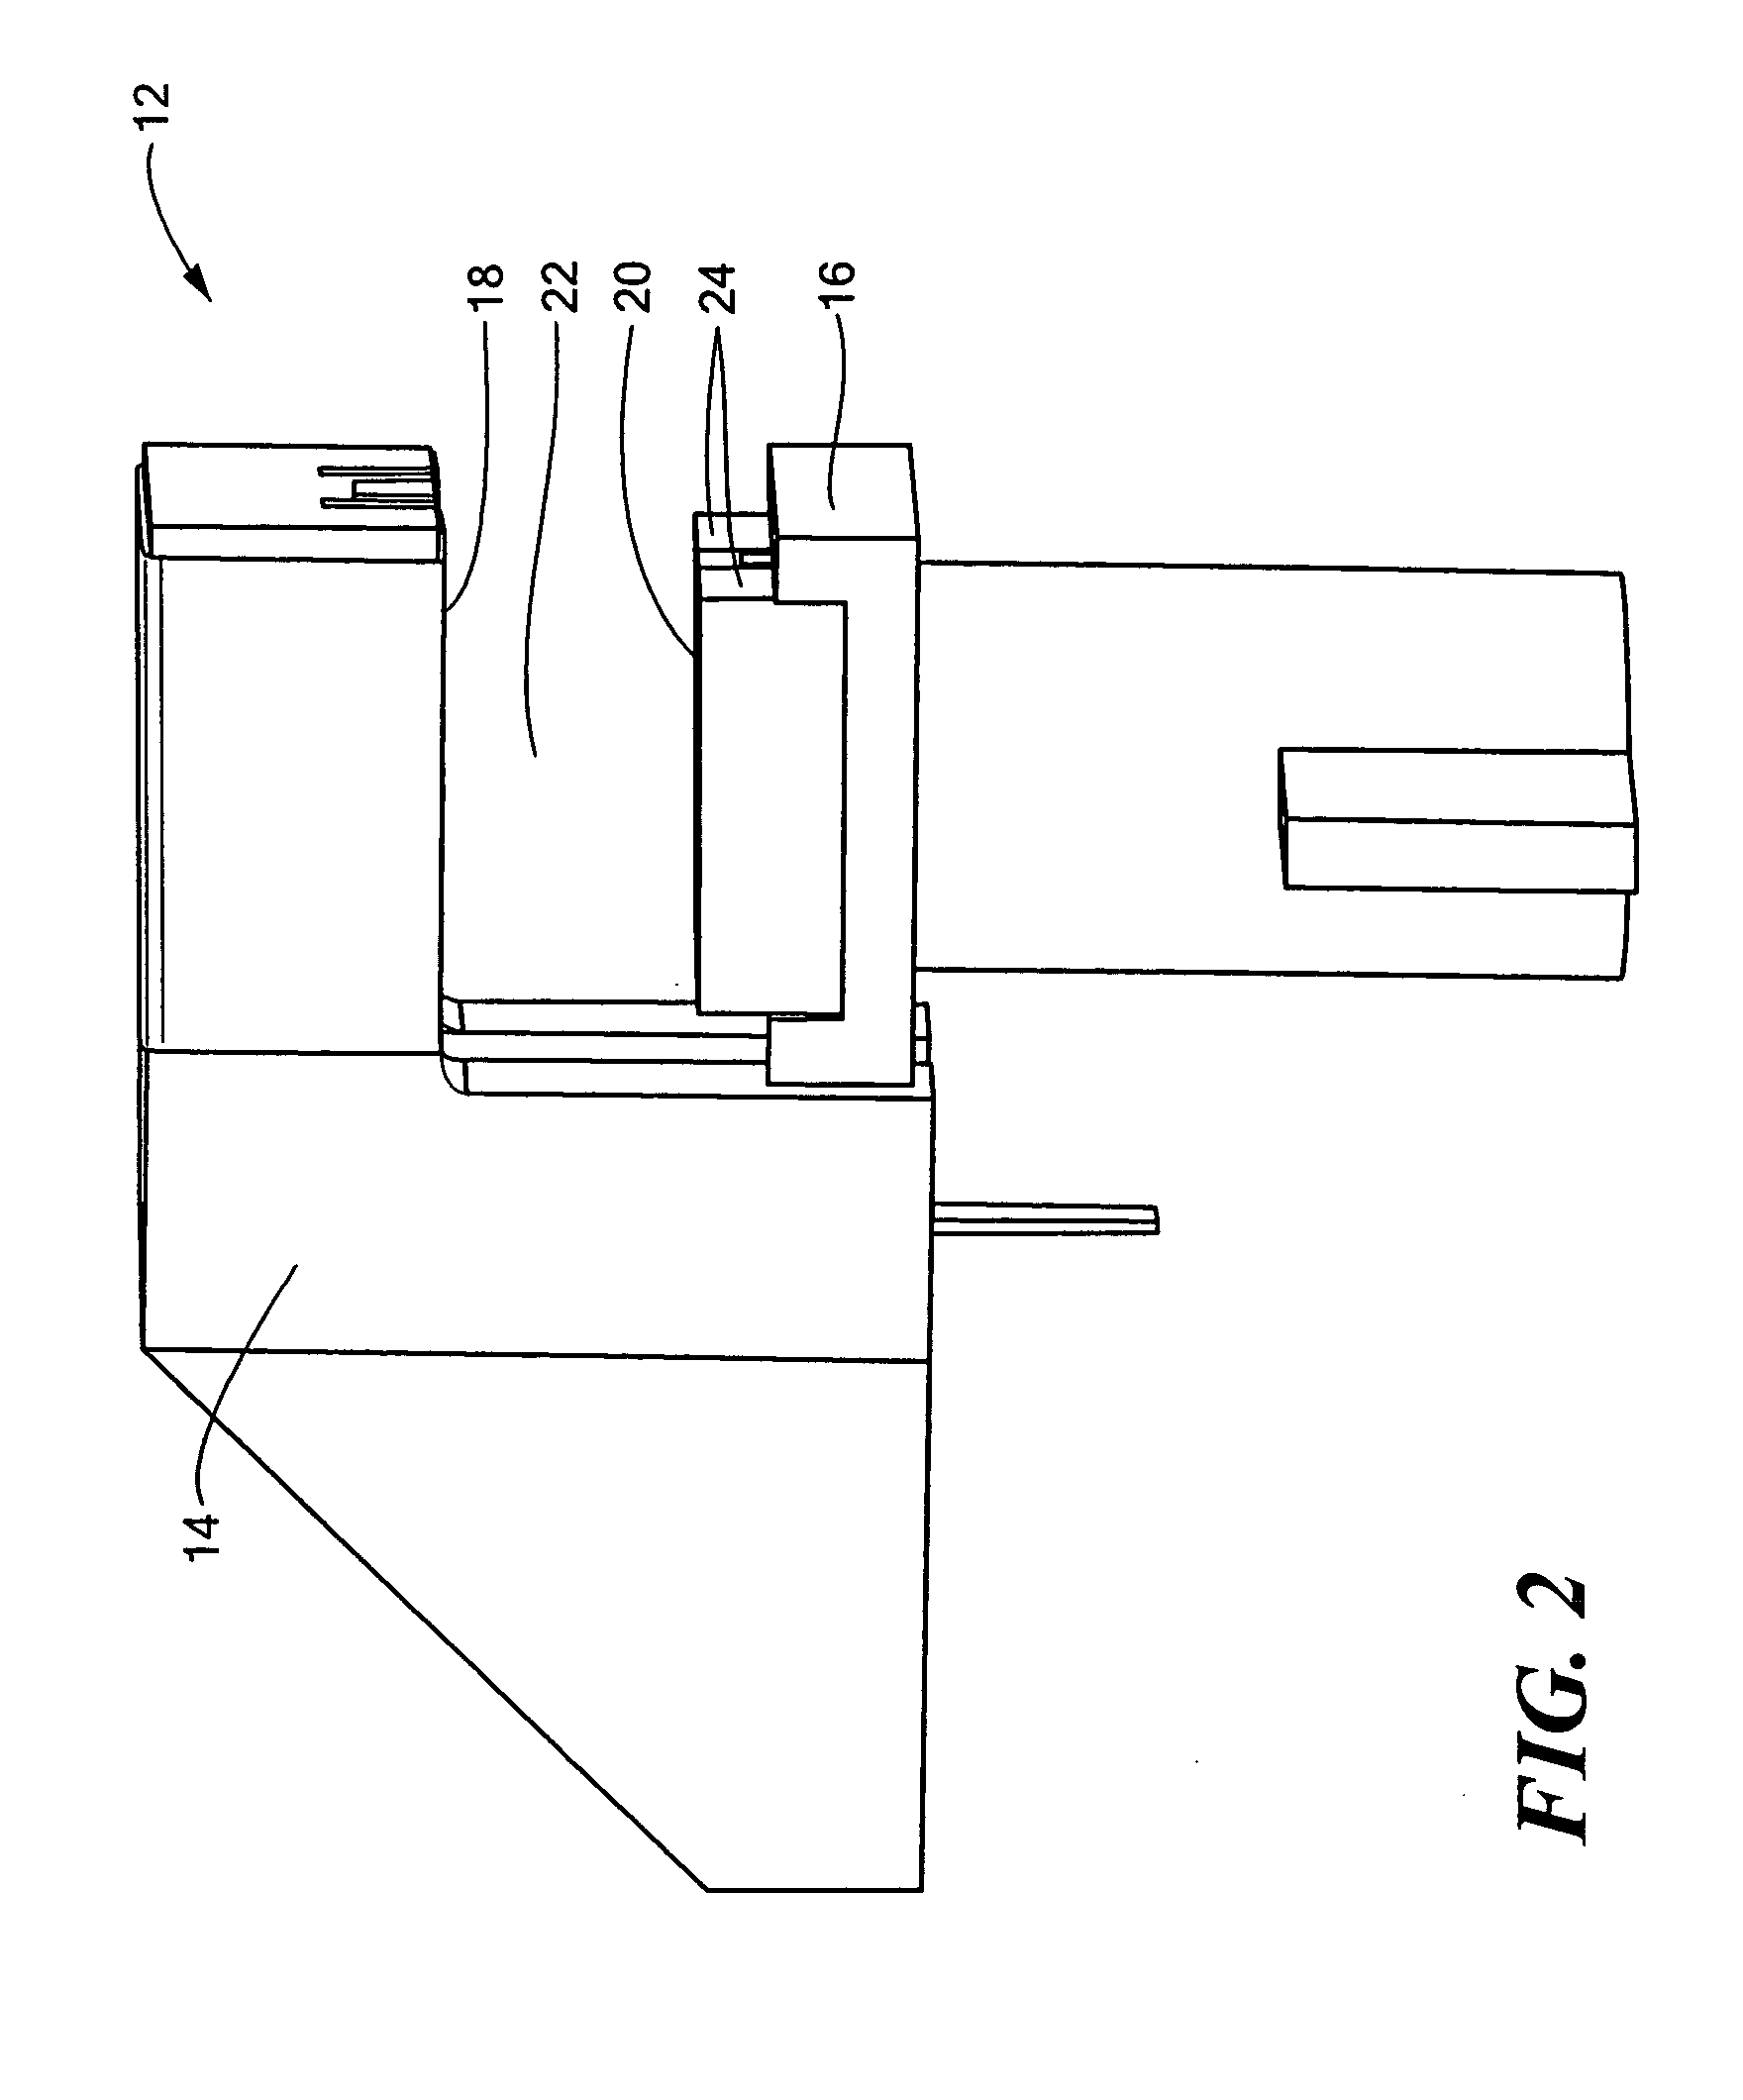 Flow control in an intravenous fluid delivery system